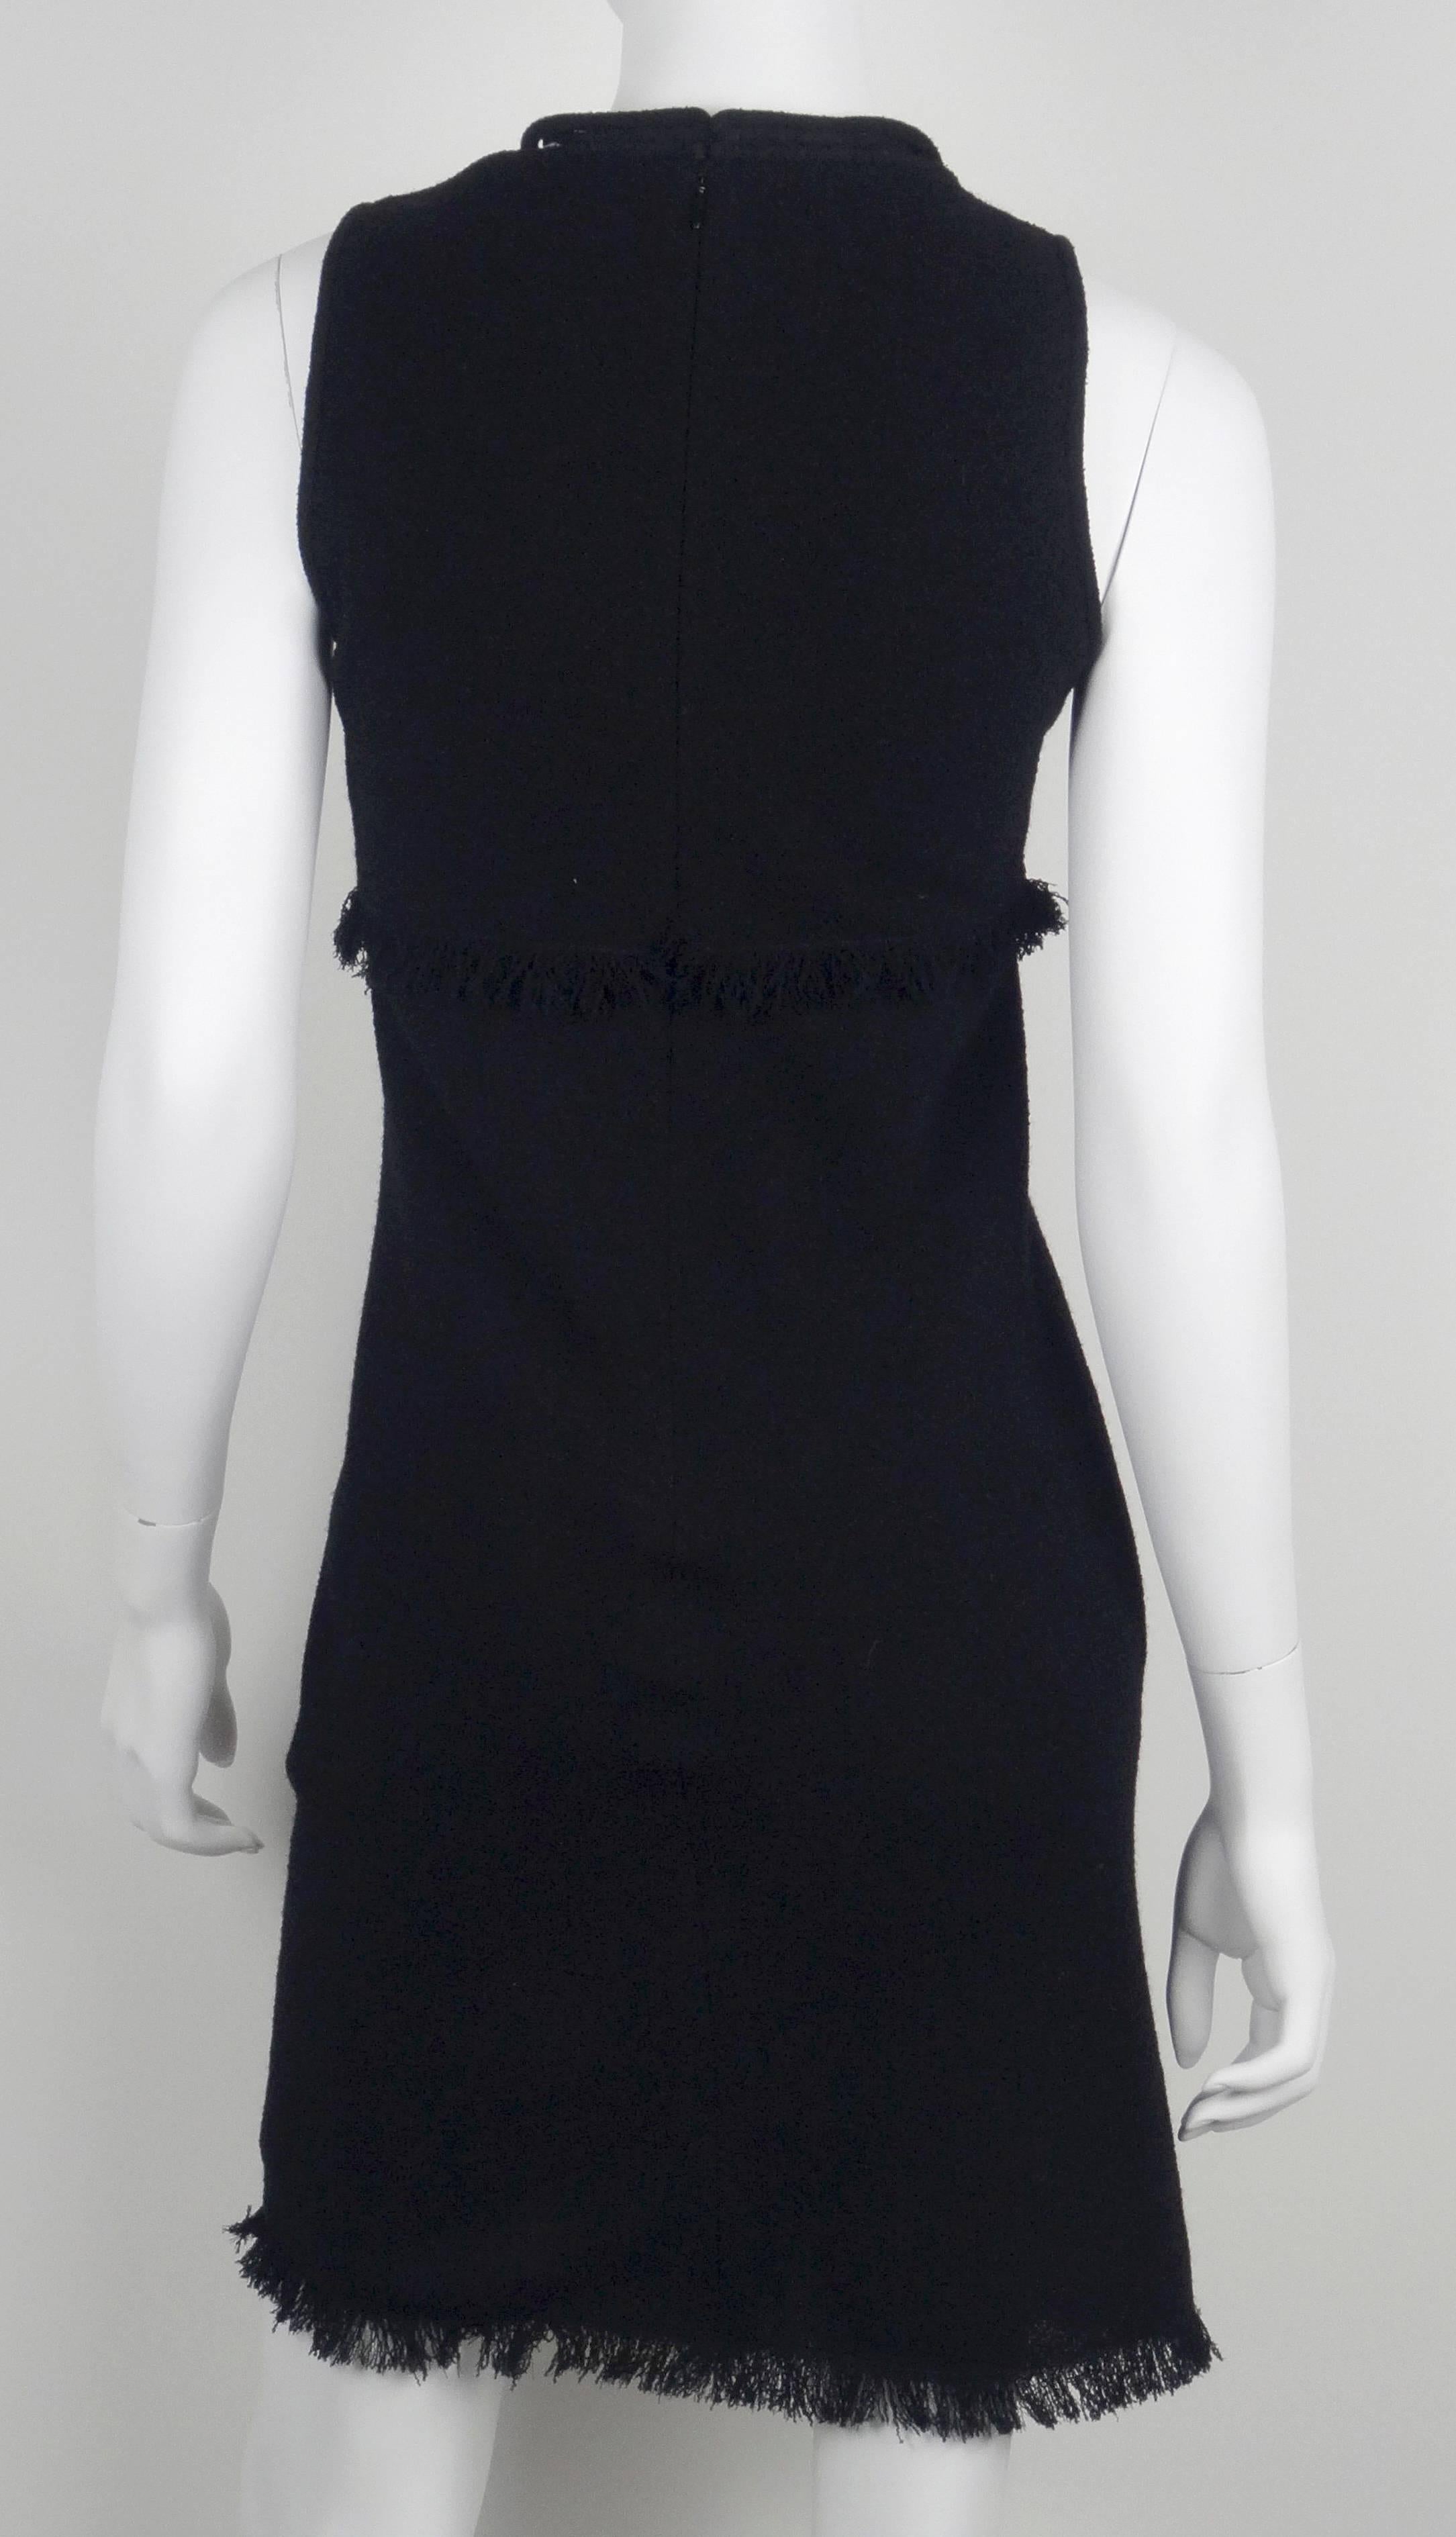 Women's Chanel 2010 Black Boucle Demi Couture Dress with Hand Embellished Bodice FR36 For Sale